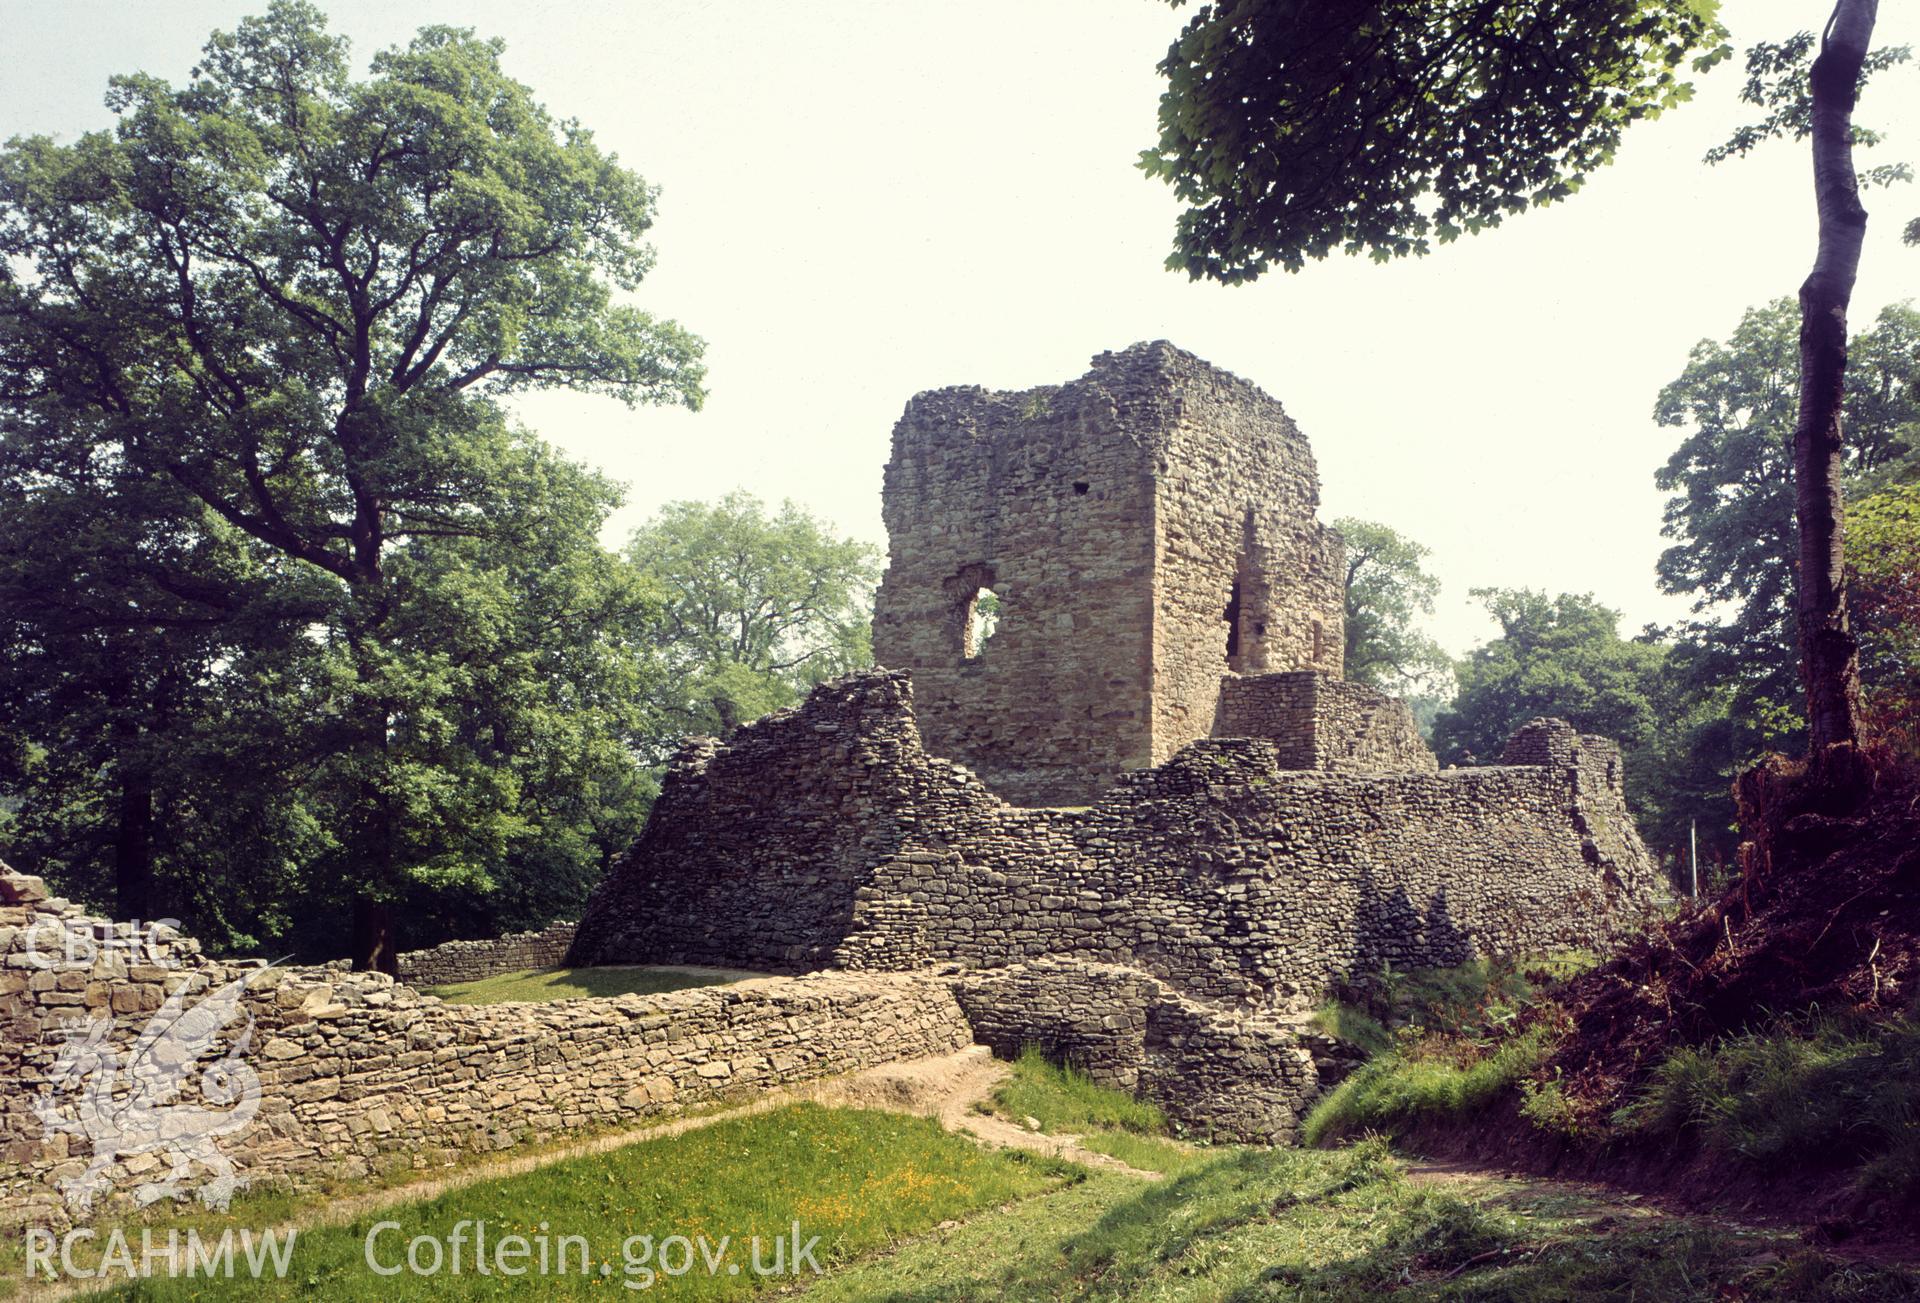 View of the Welsh Tower at Ewloe Castle taken in 1975.